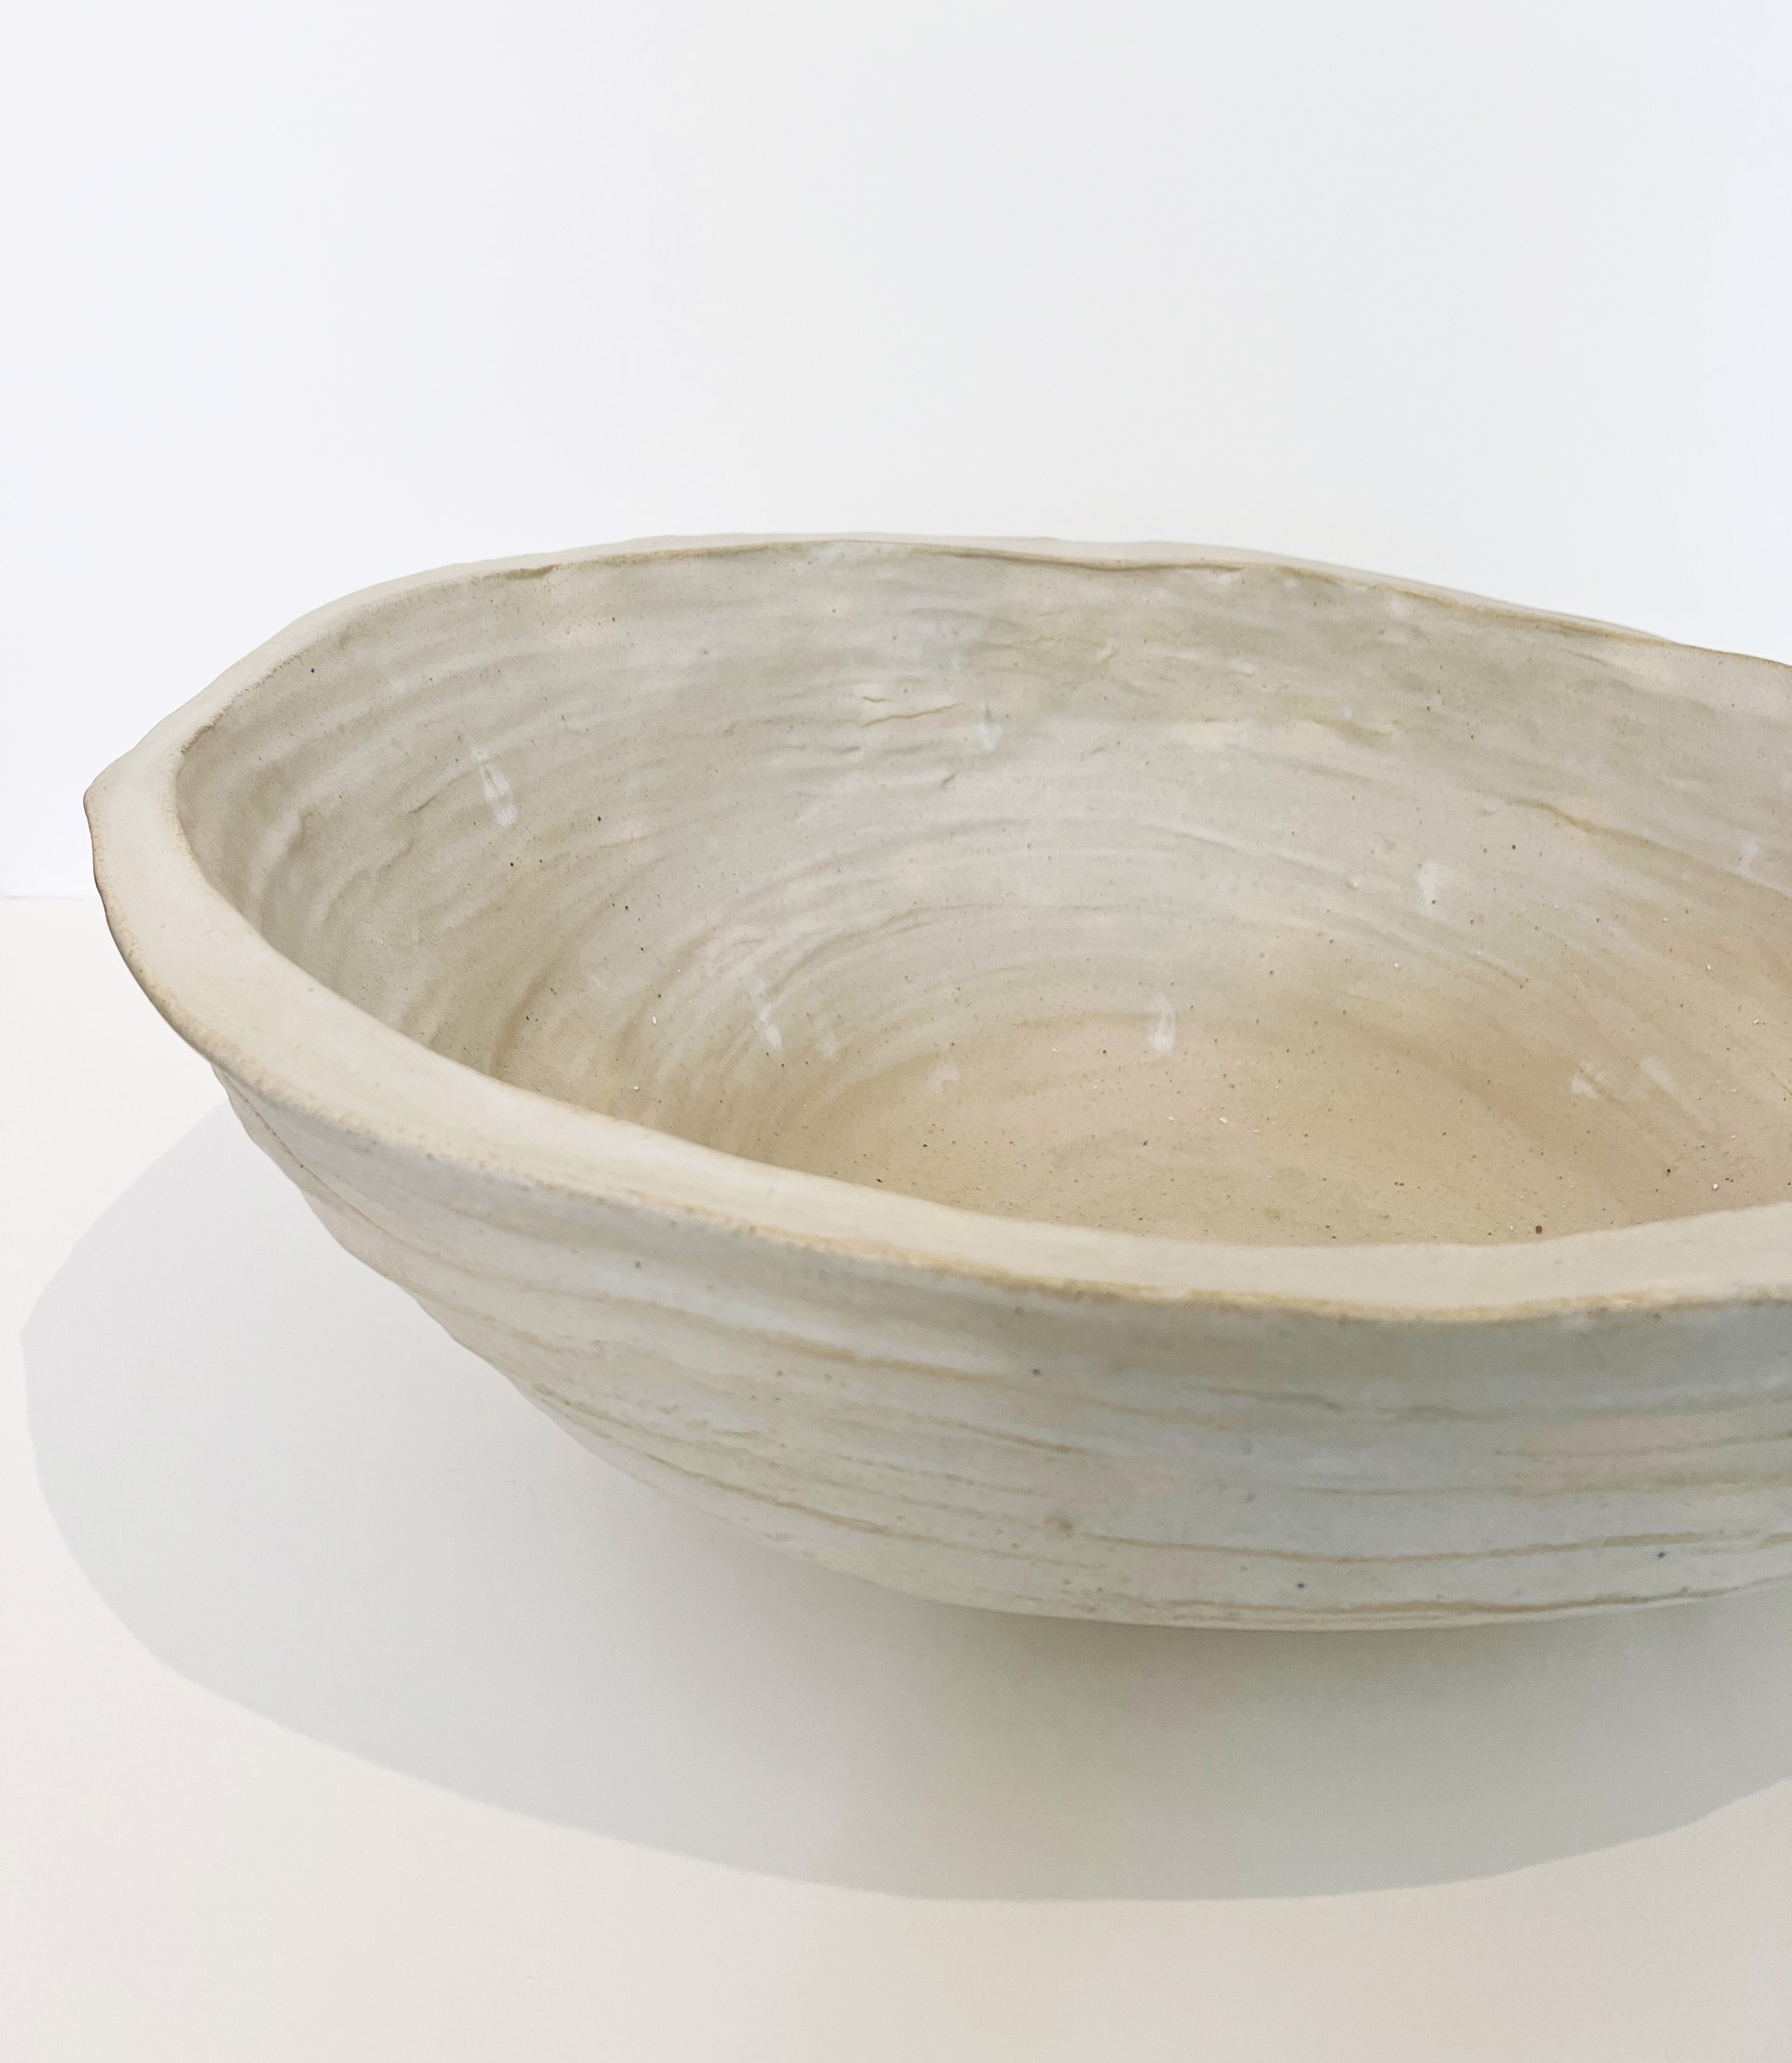 Oval Bowl by J-D Schall